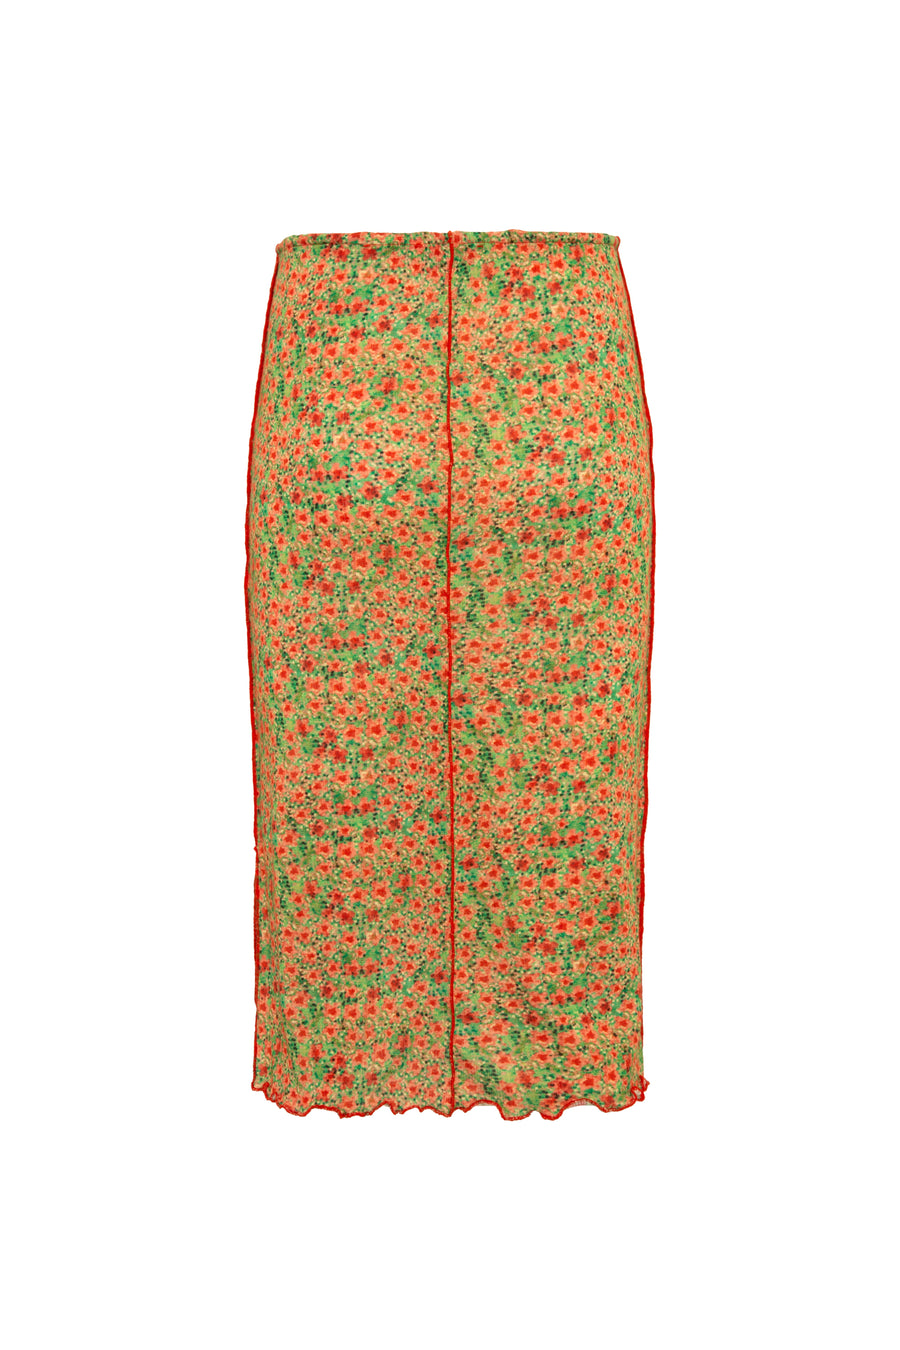 JOA - Floral printed low-waist knit skirt